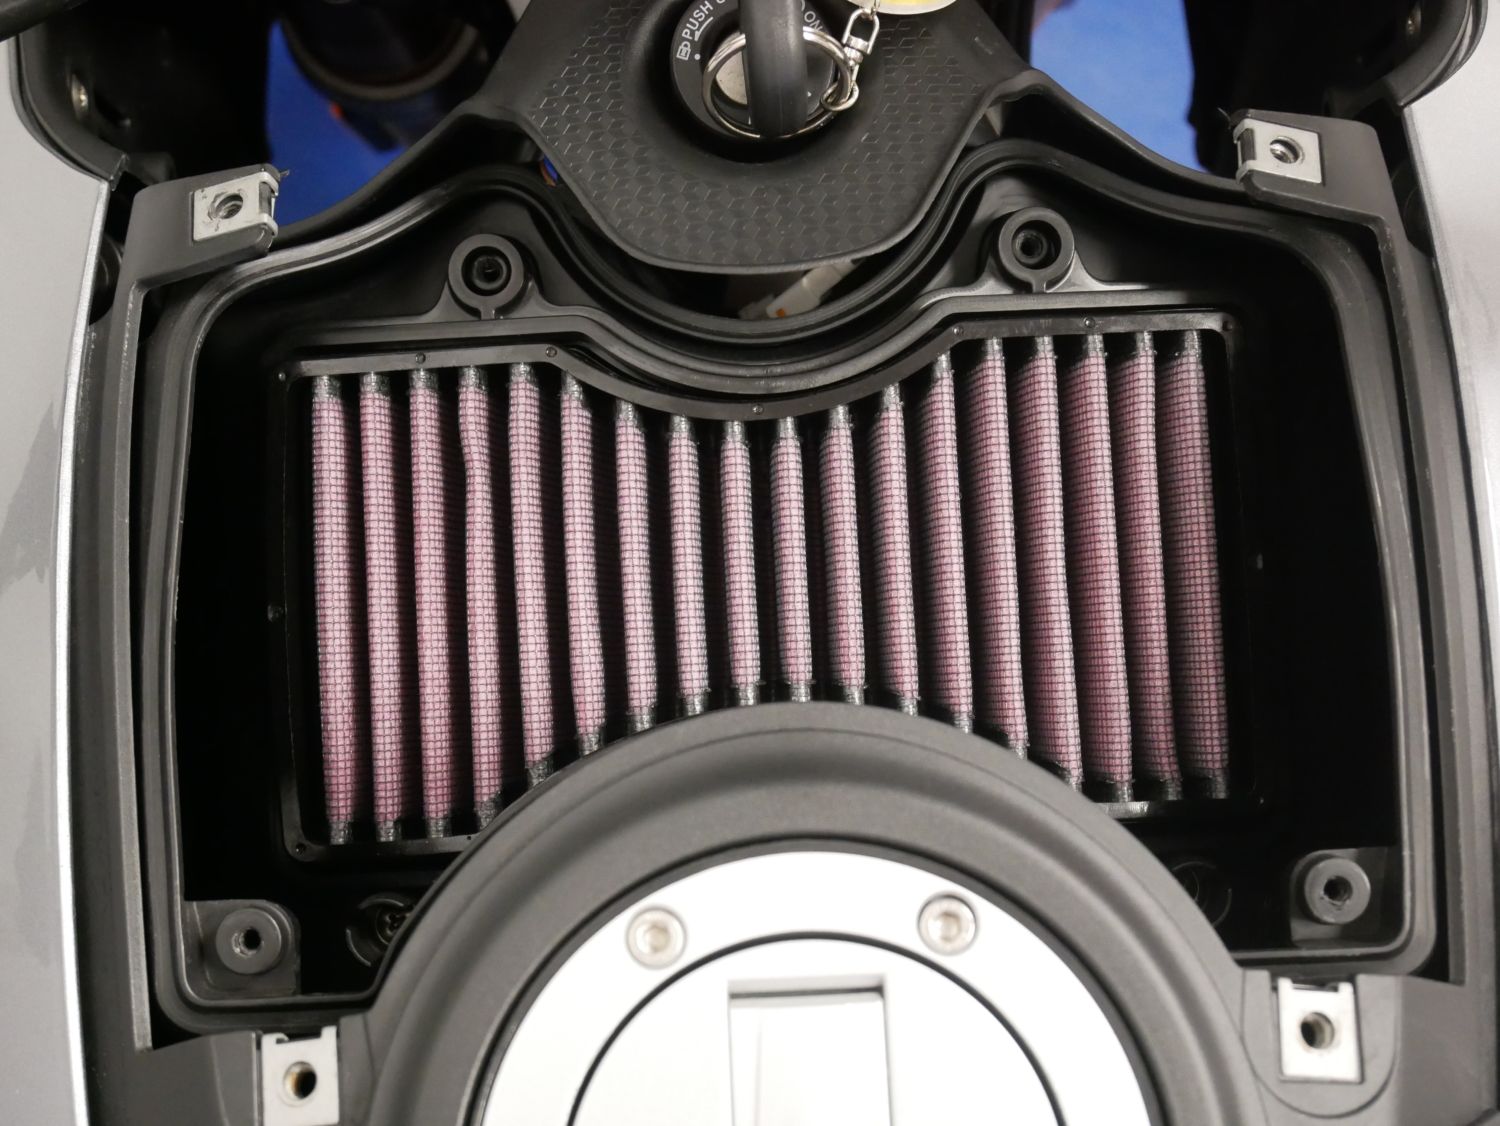 Racing air filter specific for Moto Guzzi V100